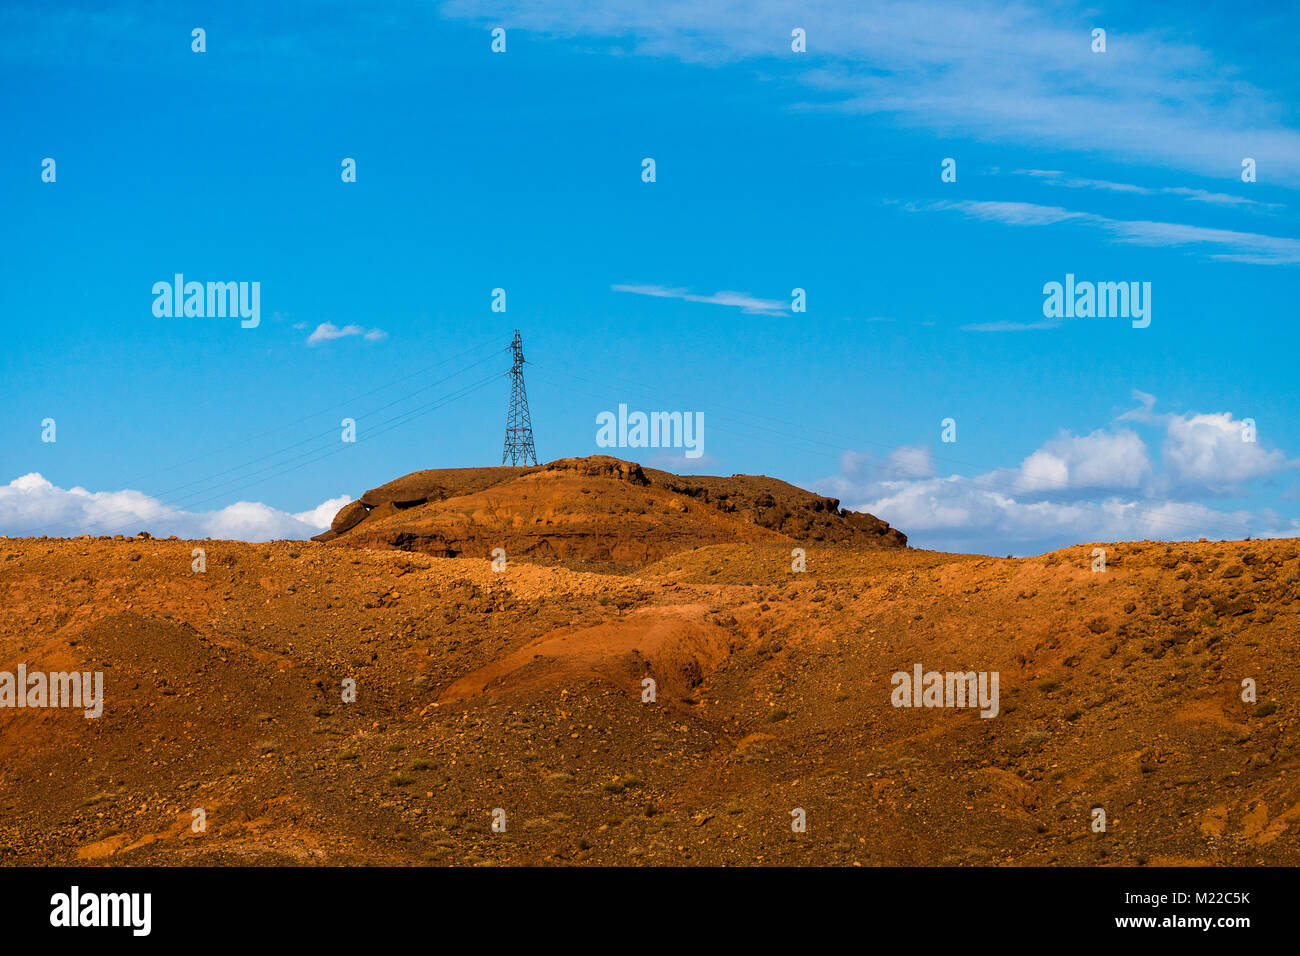 High voltage transmission towers for electricity in Sahara desert in Morocco, Africa Stock Photo